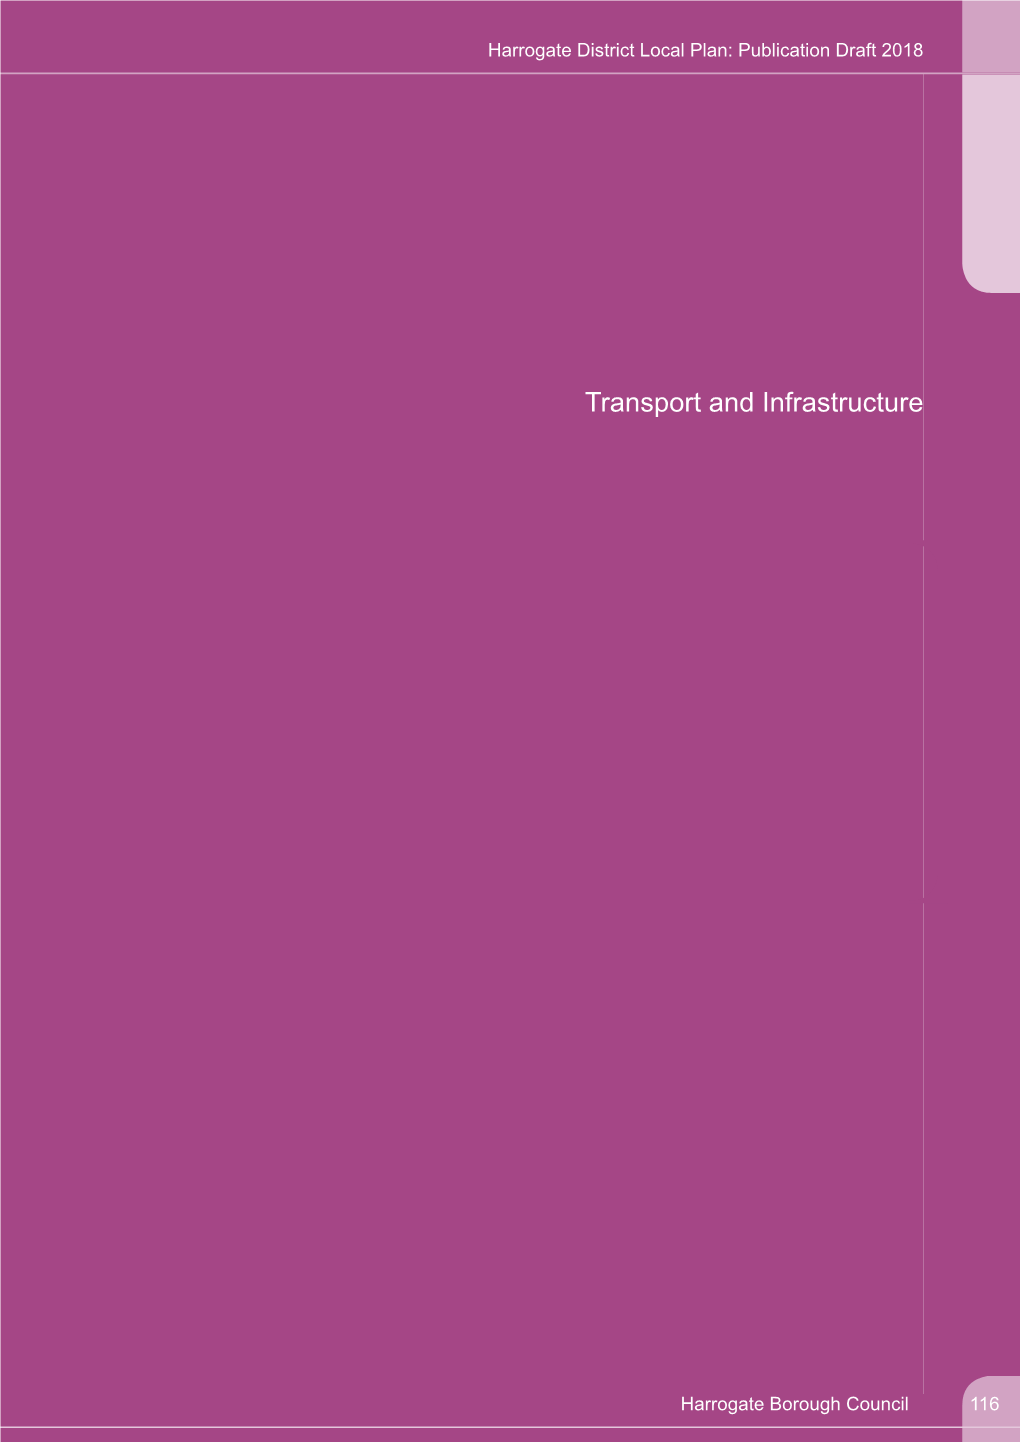 2018 January Local Plan Publication Draft 06 Transport and Infrastructure